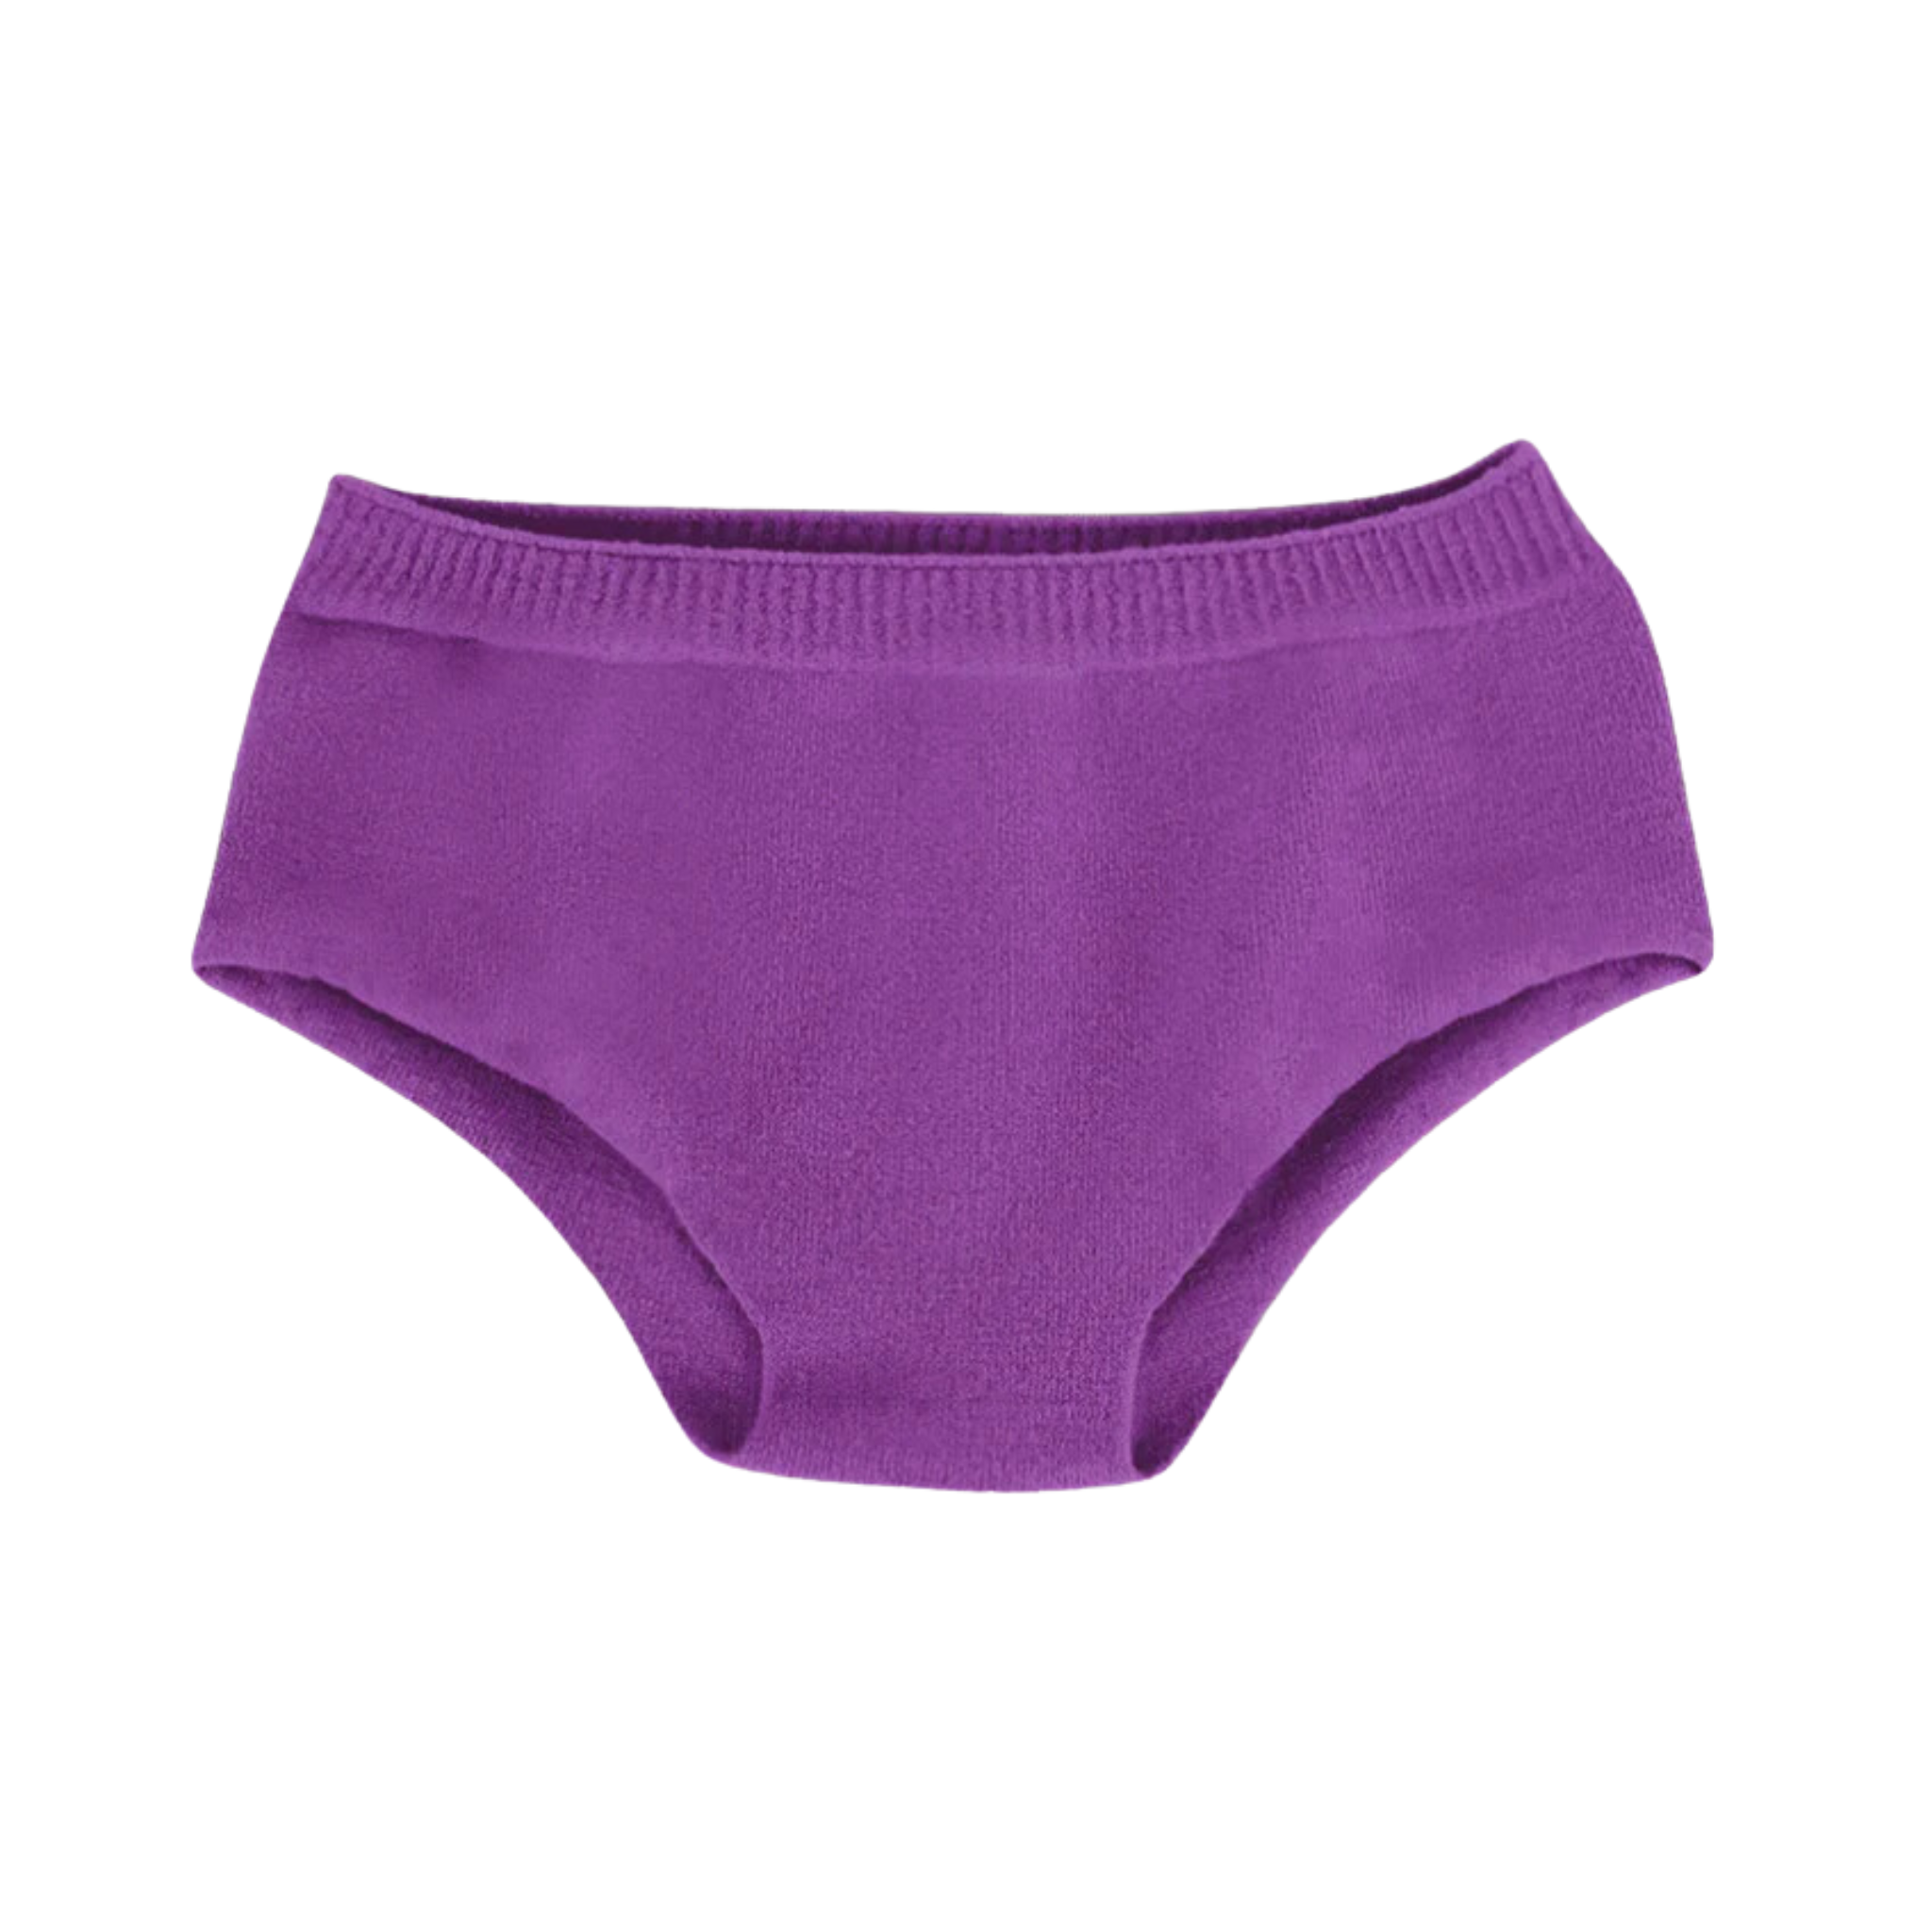 SmartKnitKIDS - Seamless Undies for Girls - Brief Pants